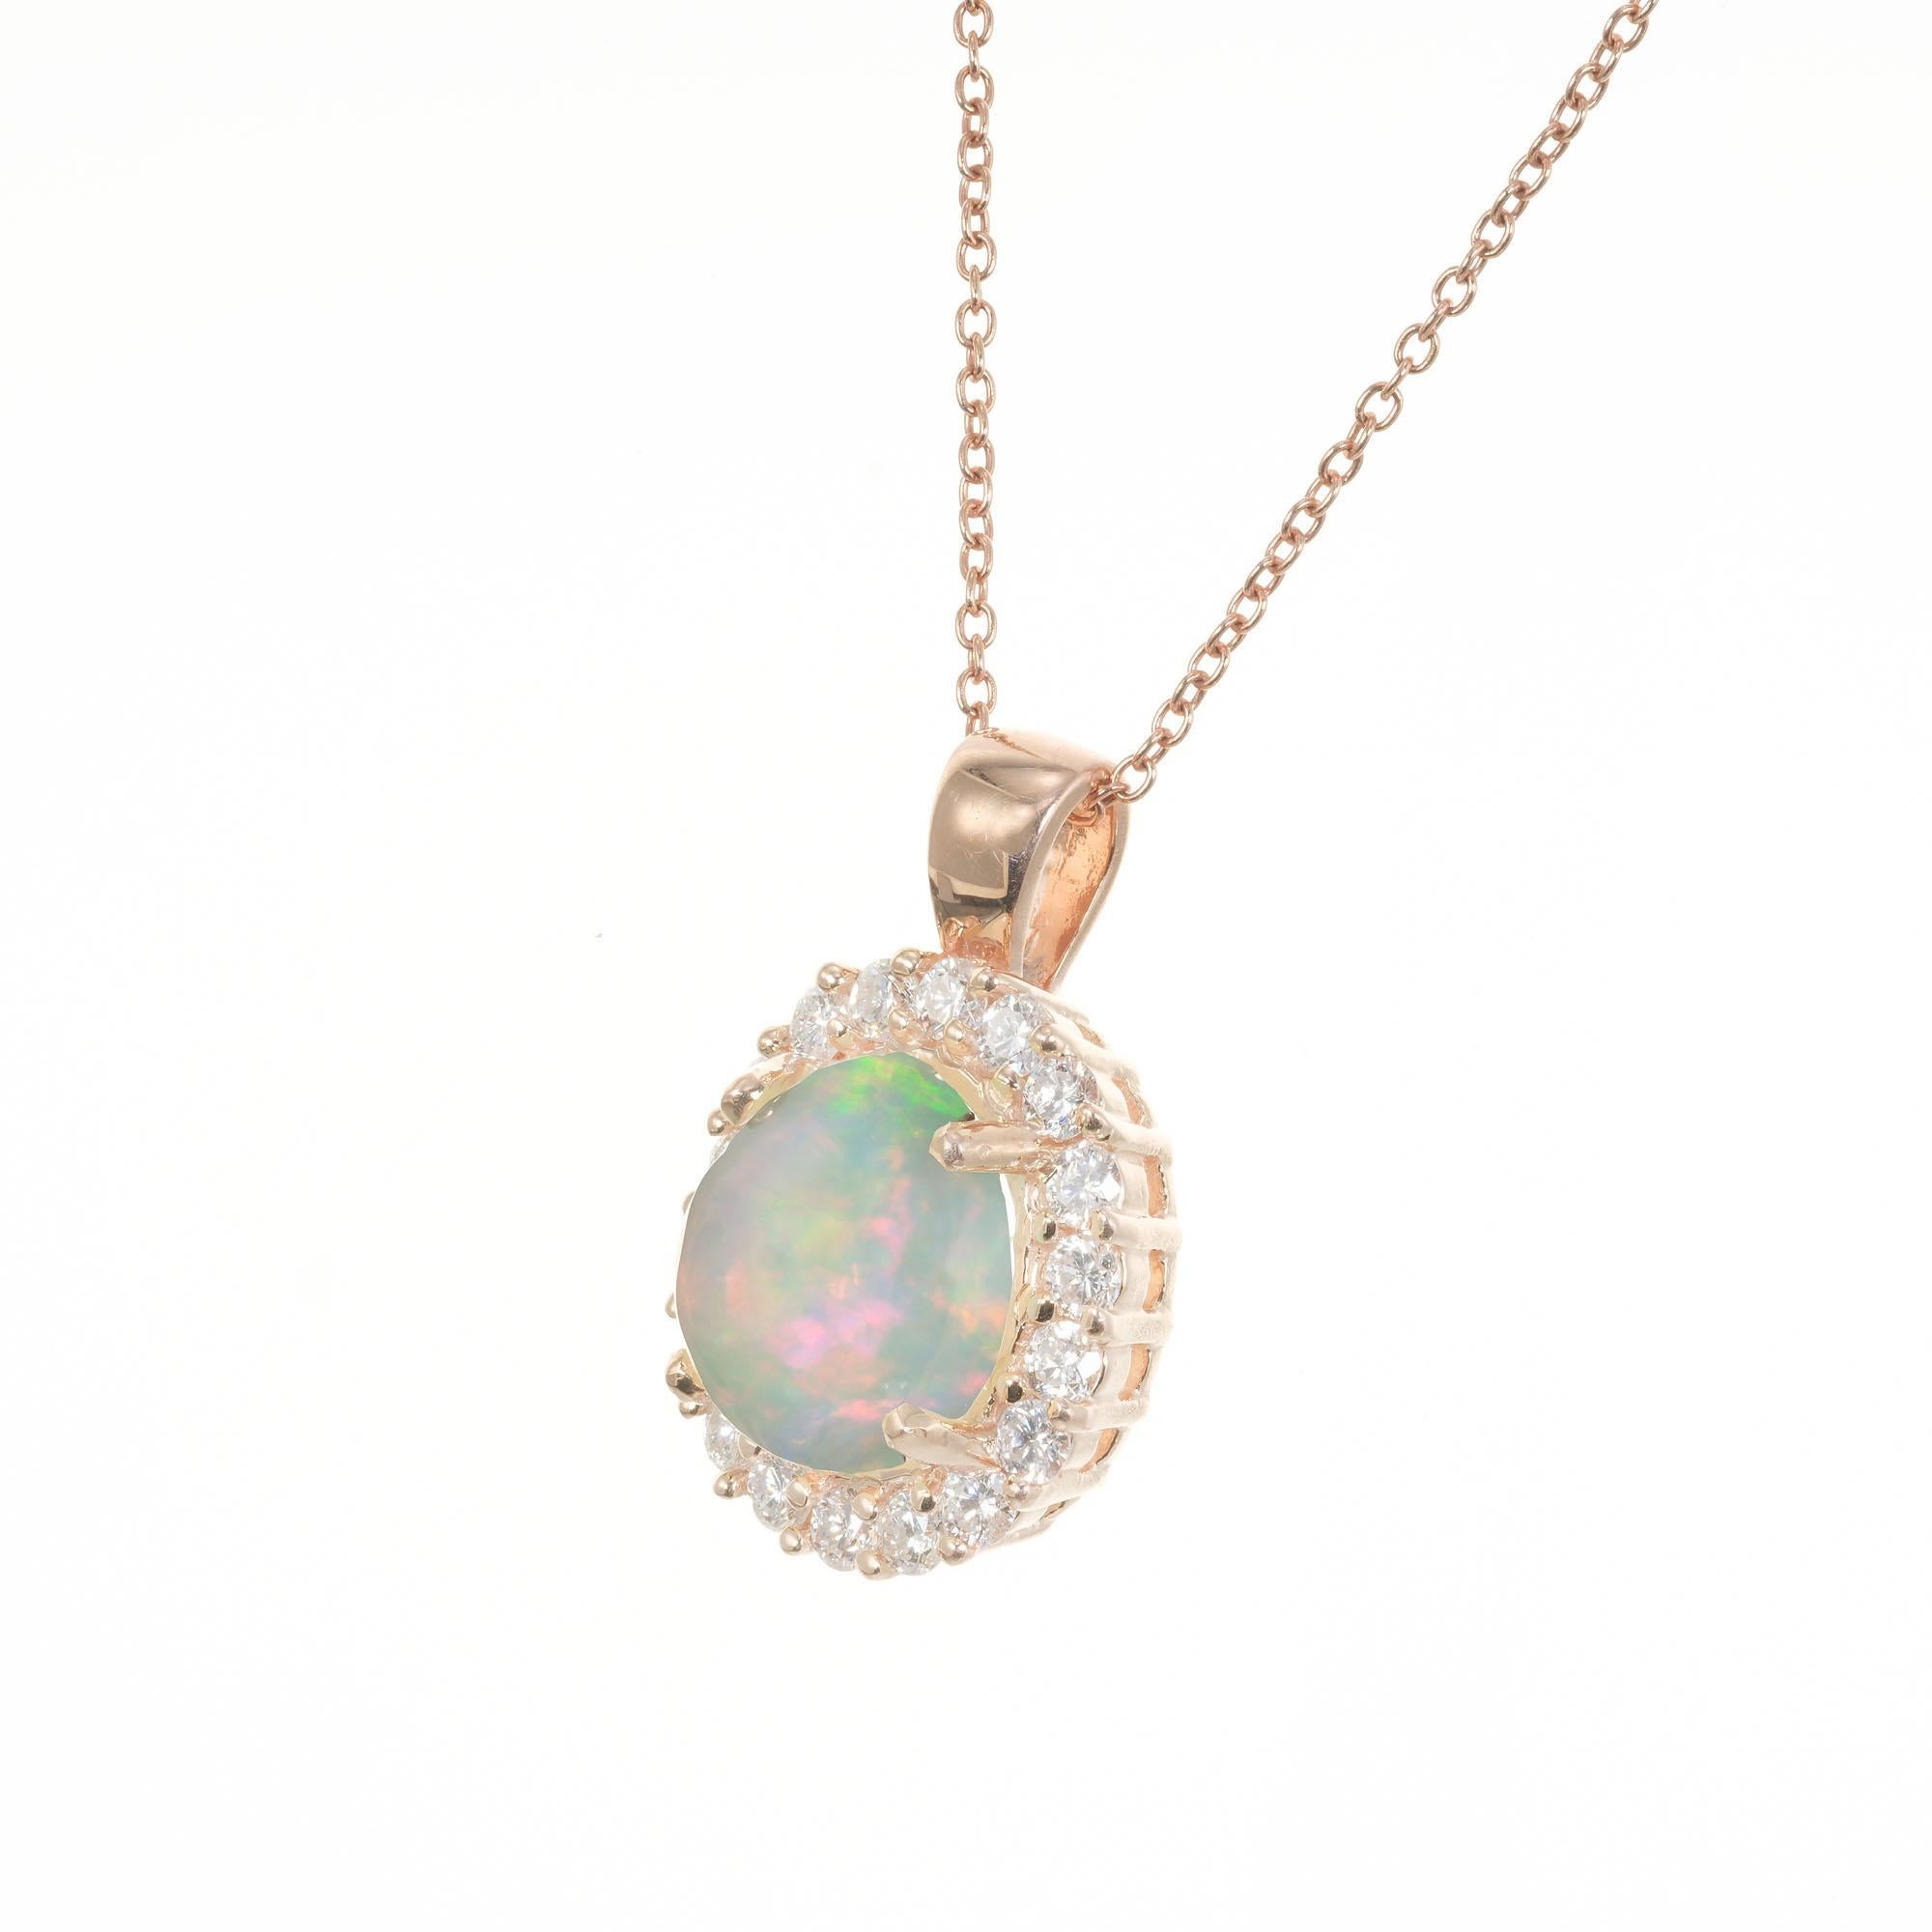 Opal and diamond pendant necklace. Oval cabochon center opal with a halo of 18 round brilliant cut diamonds in 14k rose gold. 18.5 inch chain. Red, blue and green translucent Opal. Created in the Peter Suchy Workshop. 

1 oval cabochon reddish